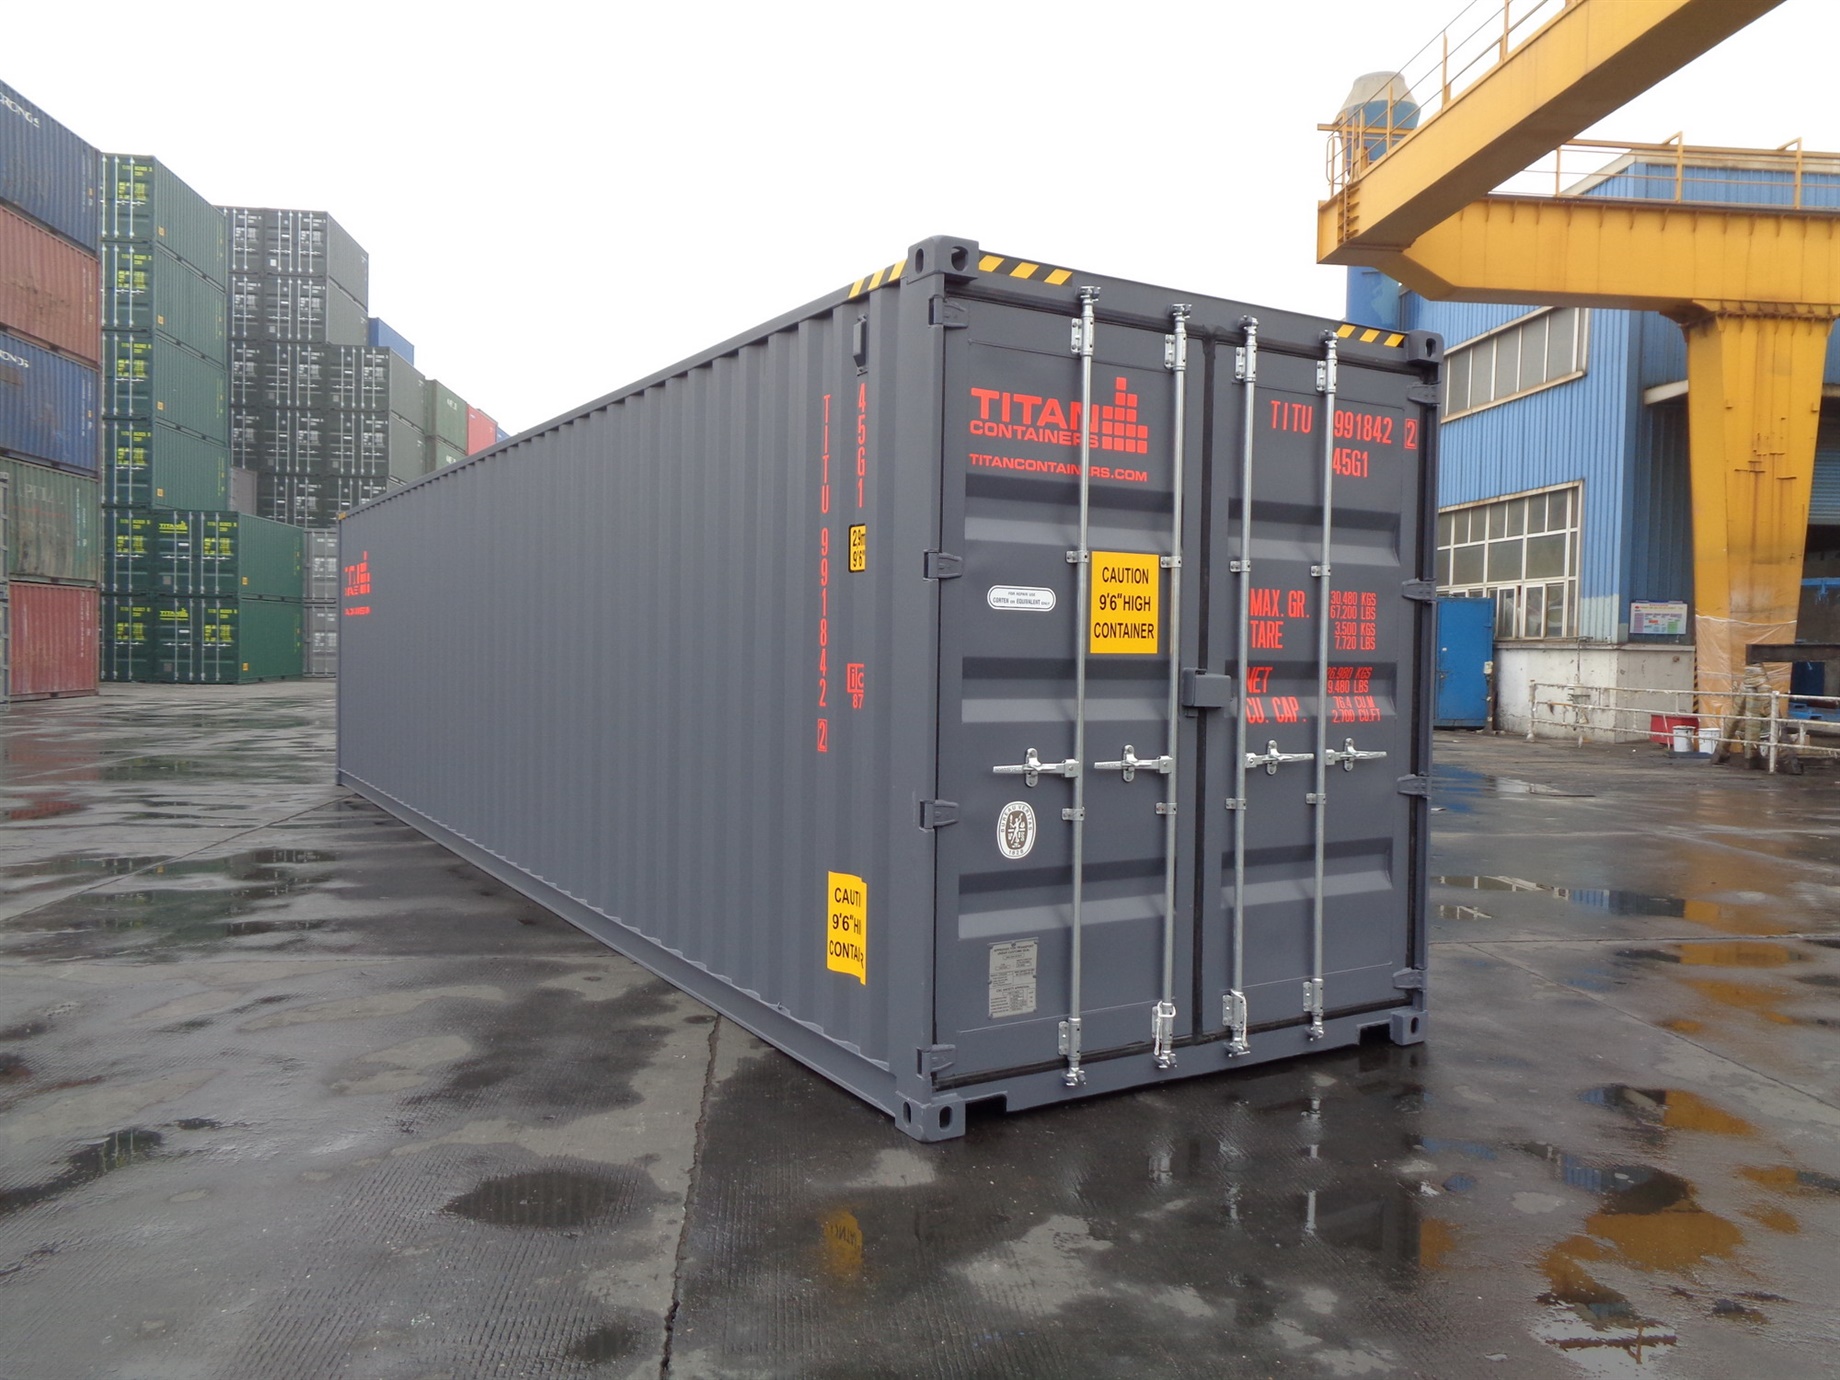 40 foot HC High Cube gray storage container titan containers